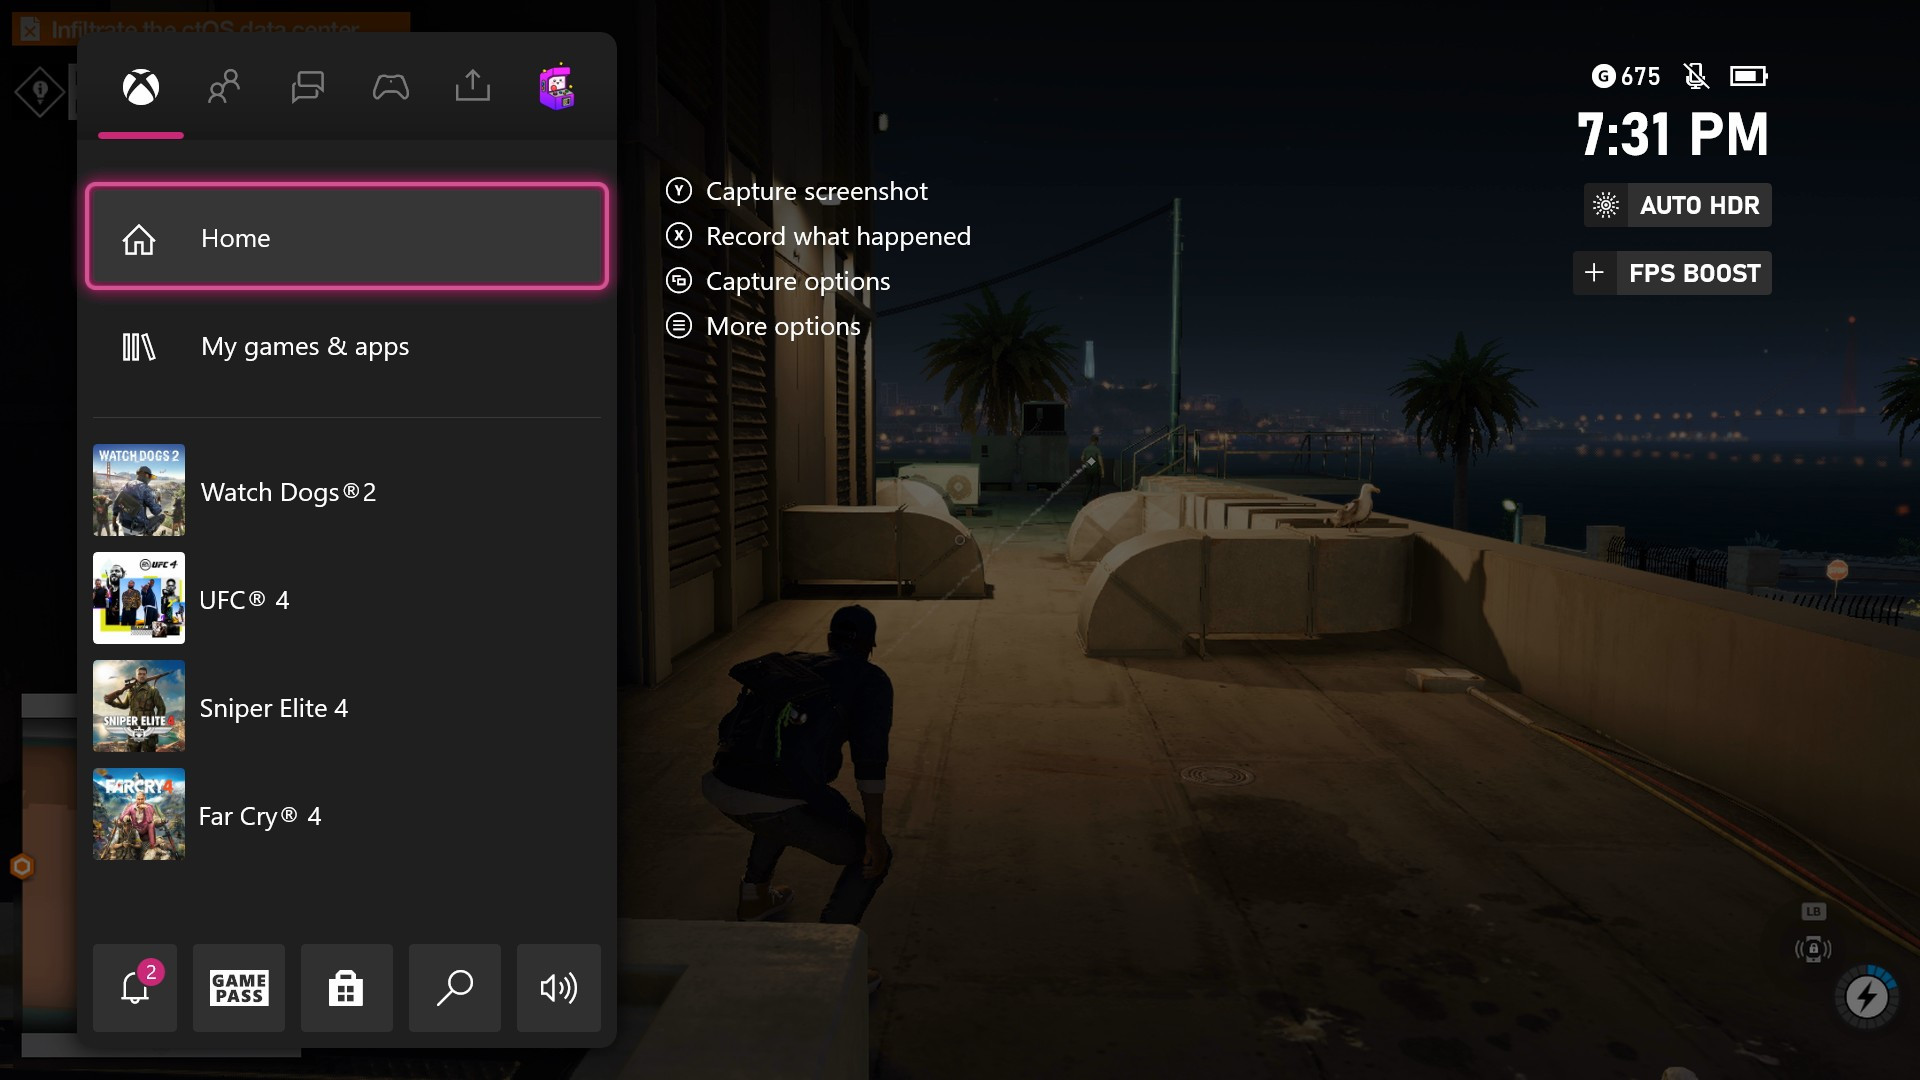 Check out the FPS Boost and Auto HDR tags in the top right.  (Image: Microsoft)